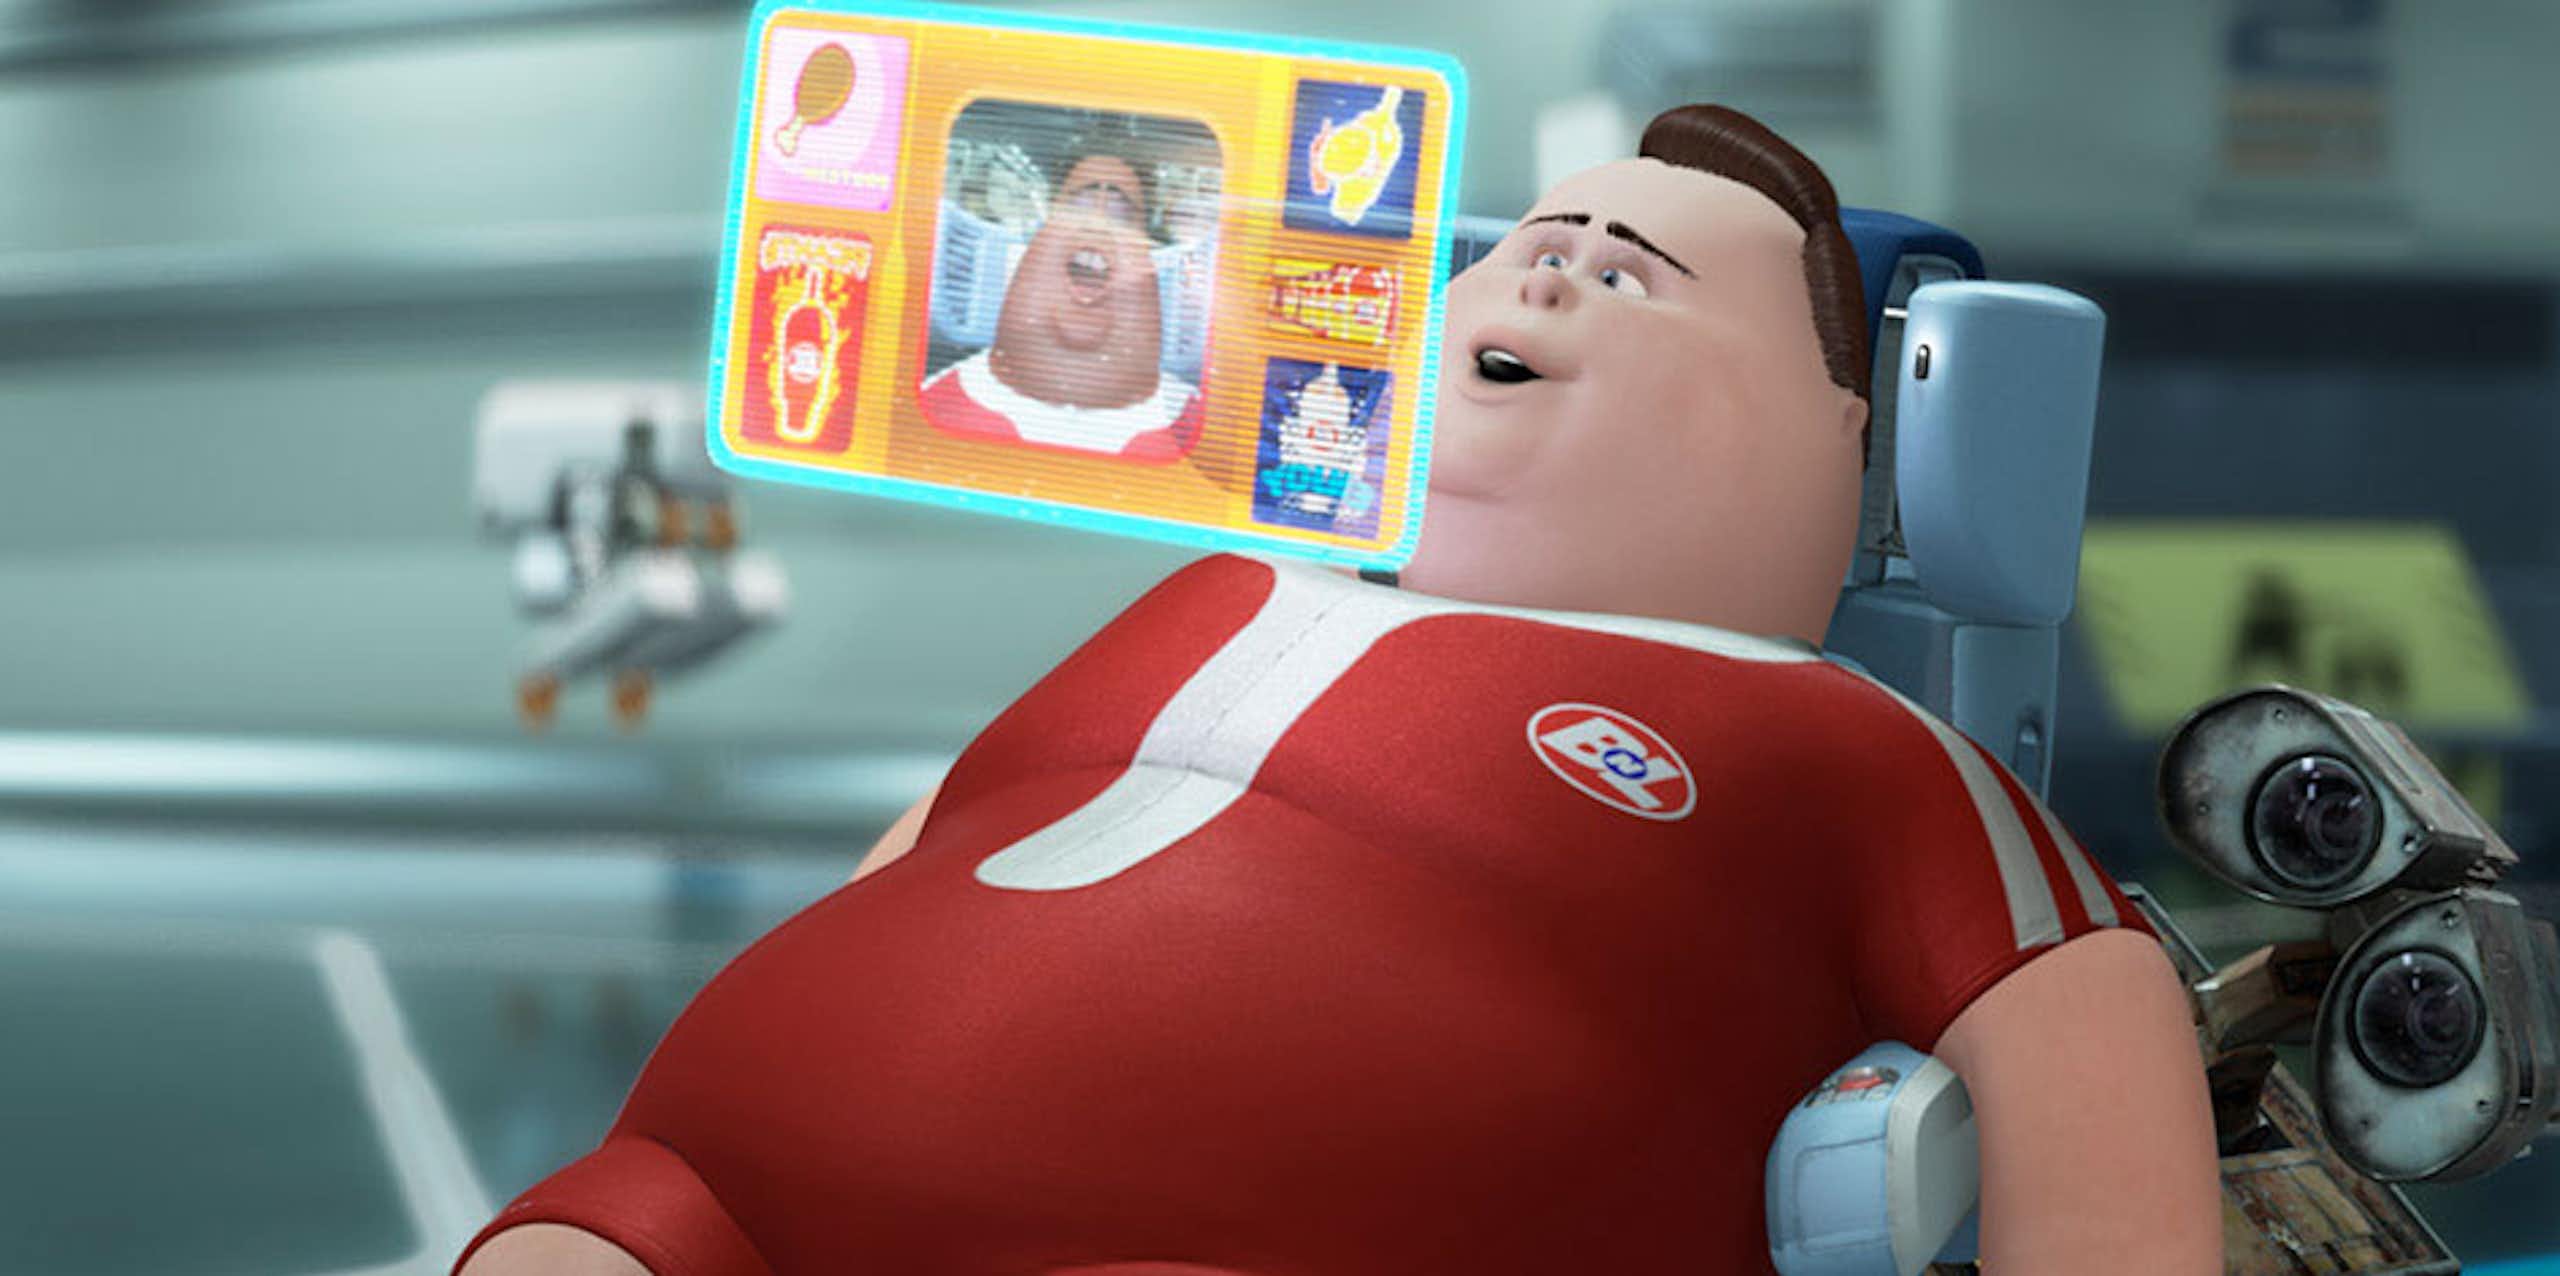 cartoon image of an obese man in a futuristic reclining chair looking at a video screen floating in front of his face